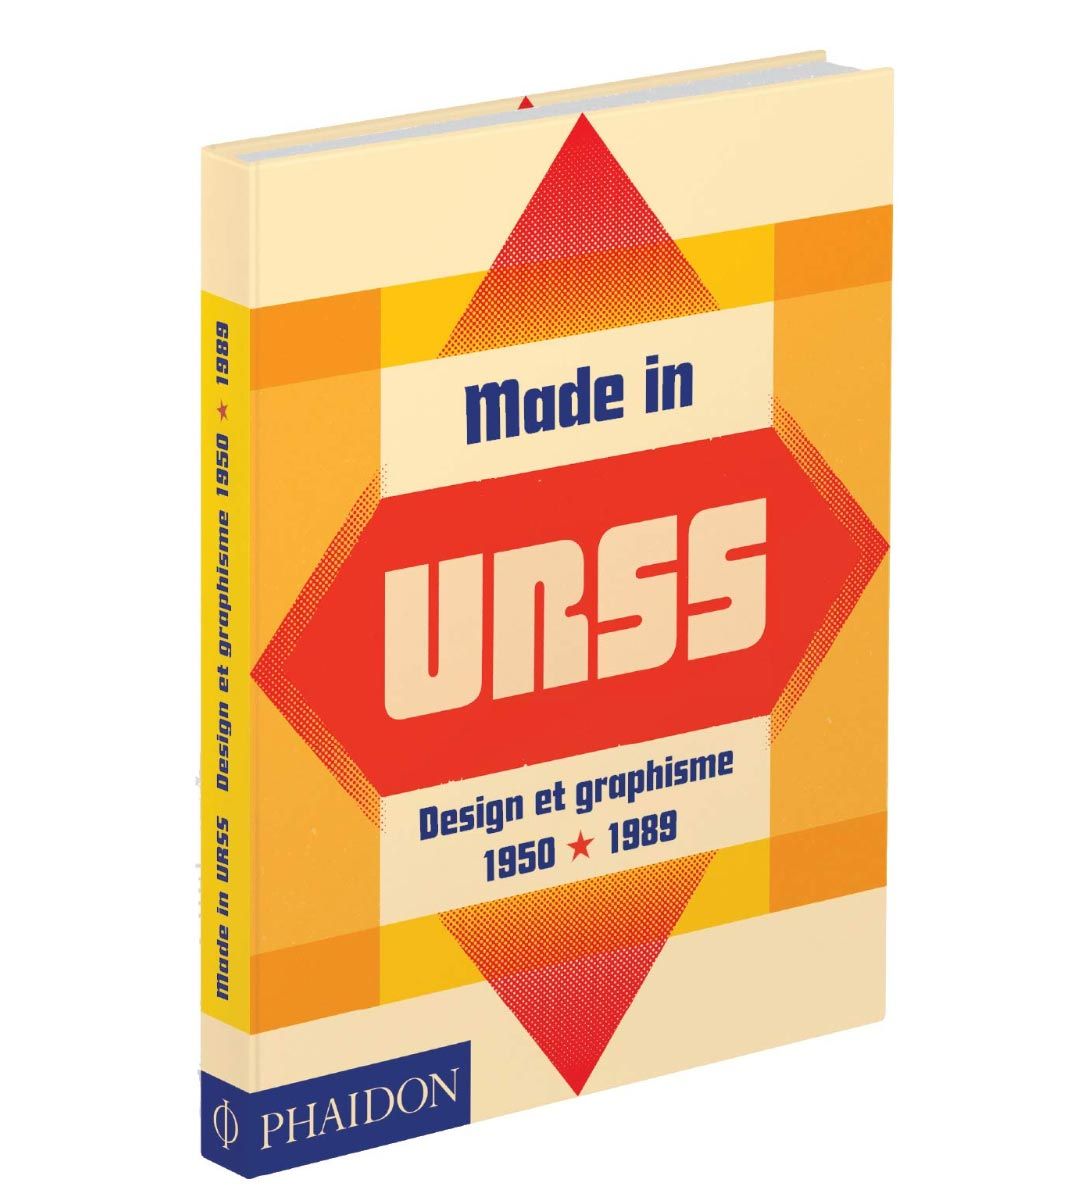 Made in URSS